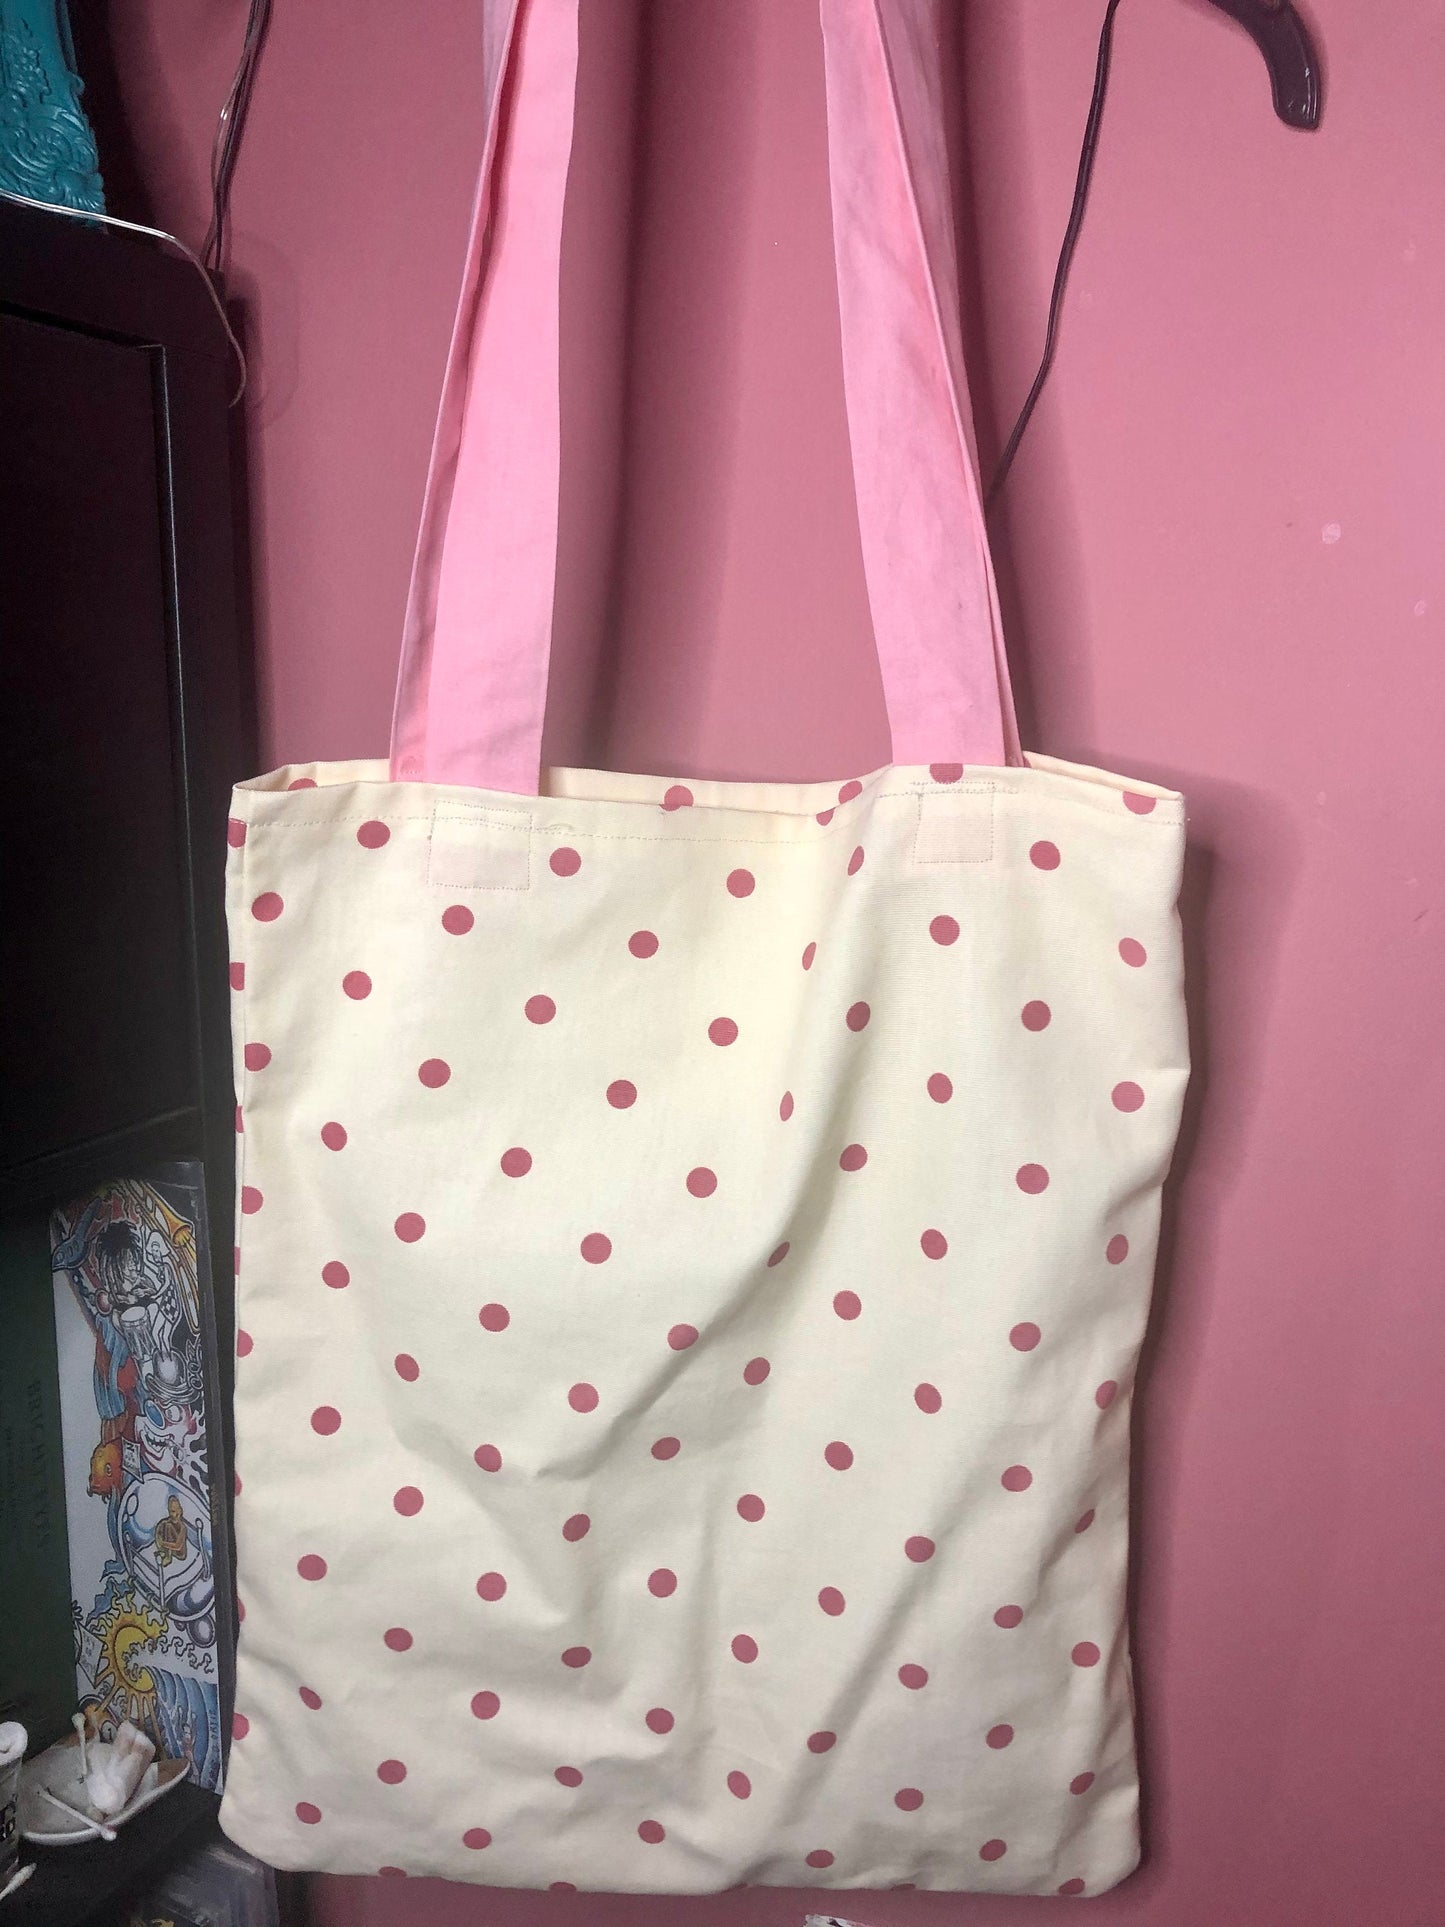 Large canvas Tote Bag, zero waste accessory, gifts for women, pink polka dot on cream, 100 percent cotton, Mother’s Day gift from daughter